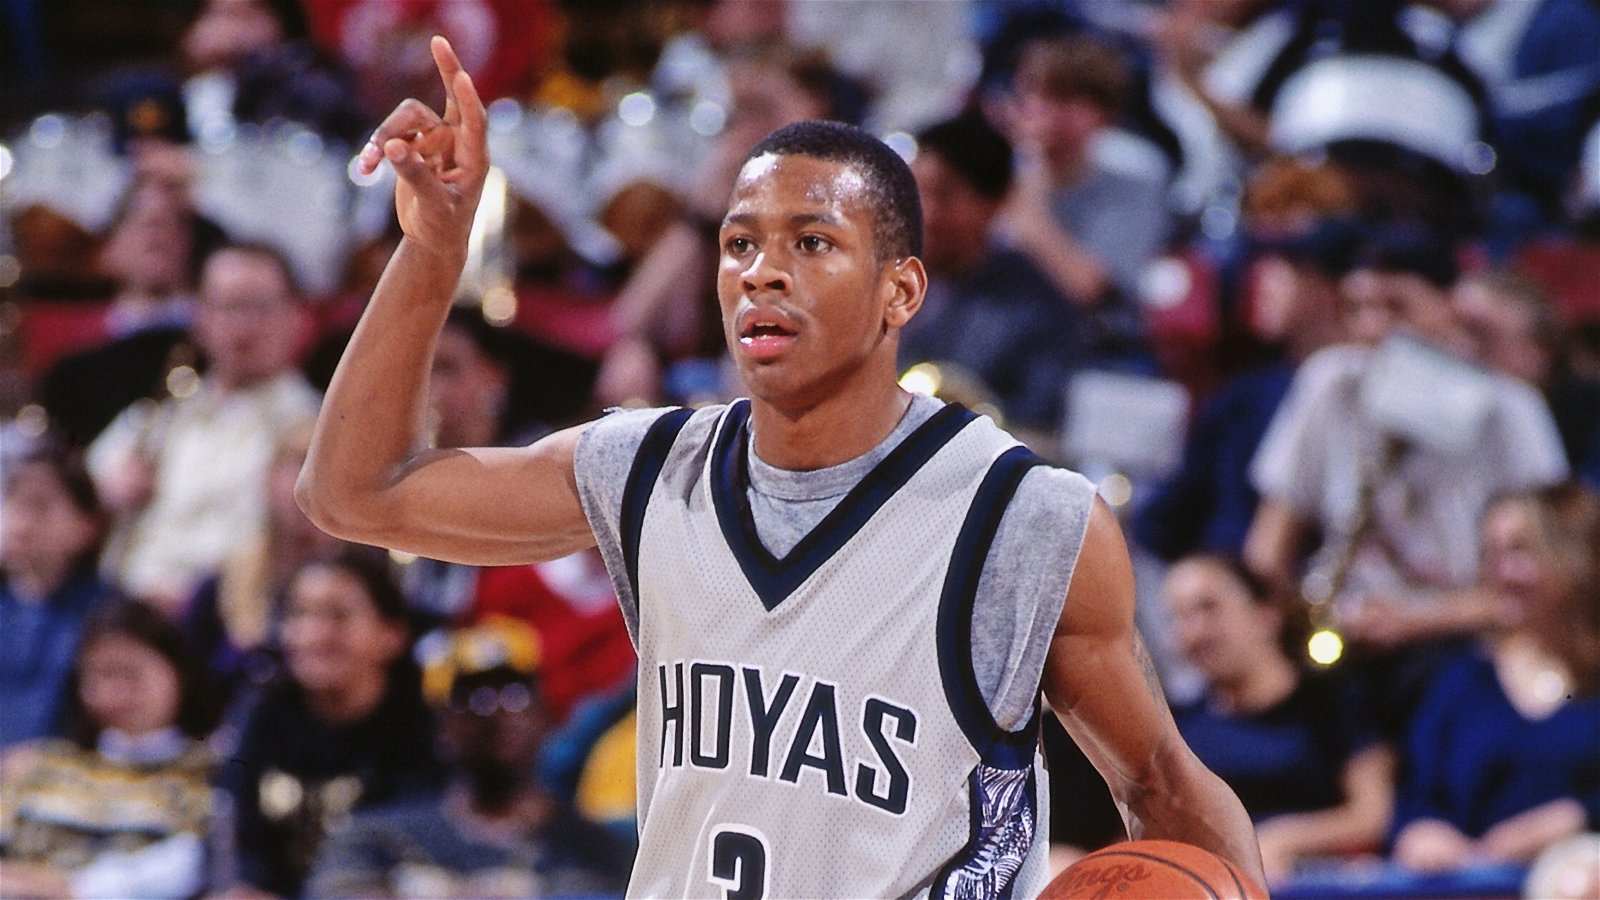 March Madness legend Allen Iverson playing for the Georgetown Hoyas